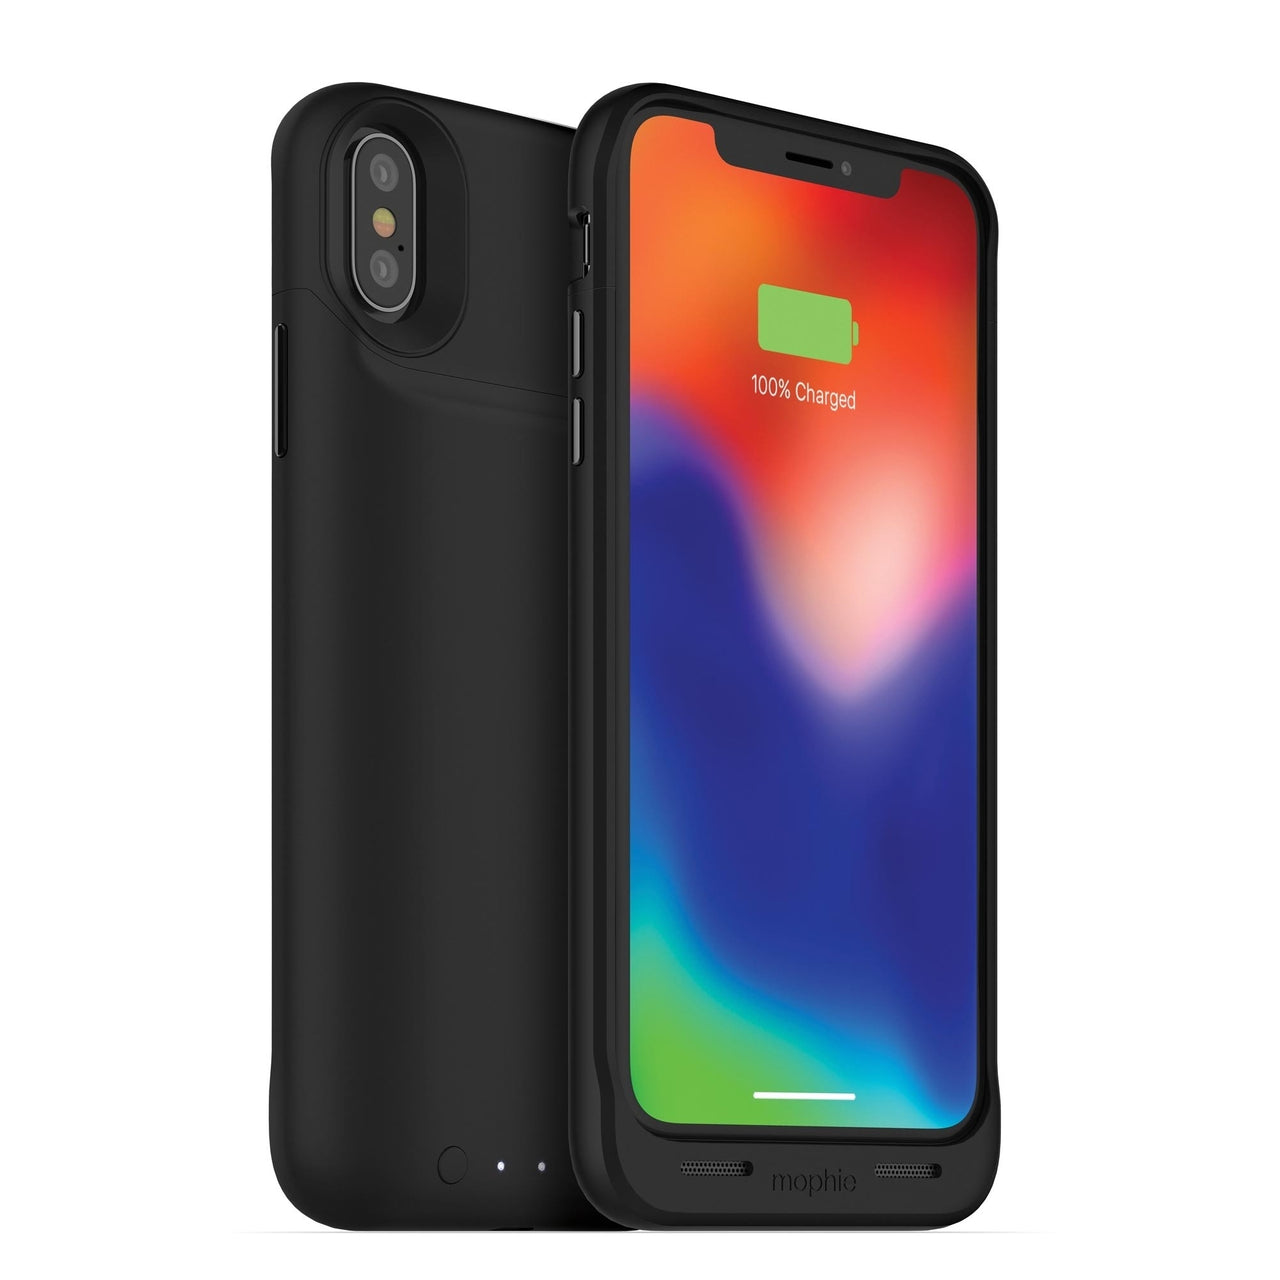 Mophie Juice Pack Air 1720MaH for iPhone X/XS - Black